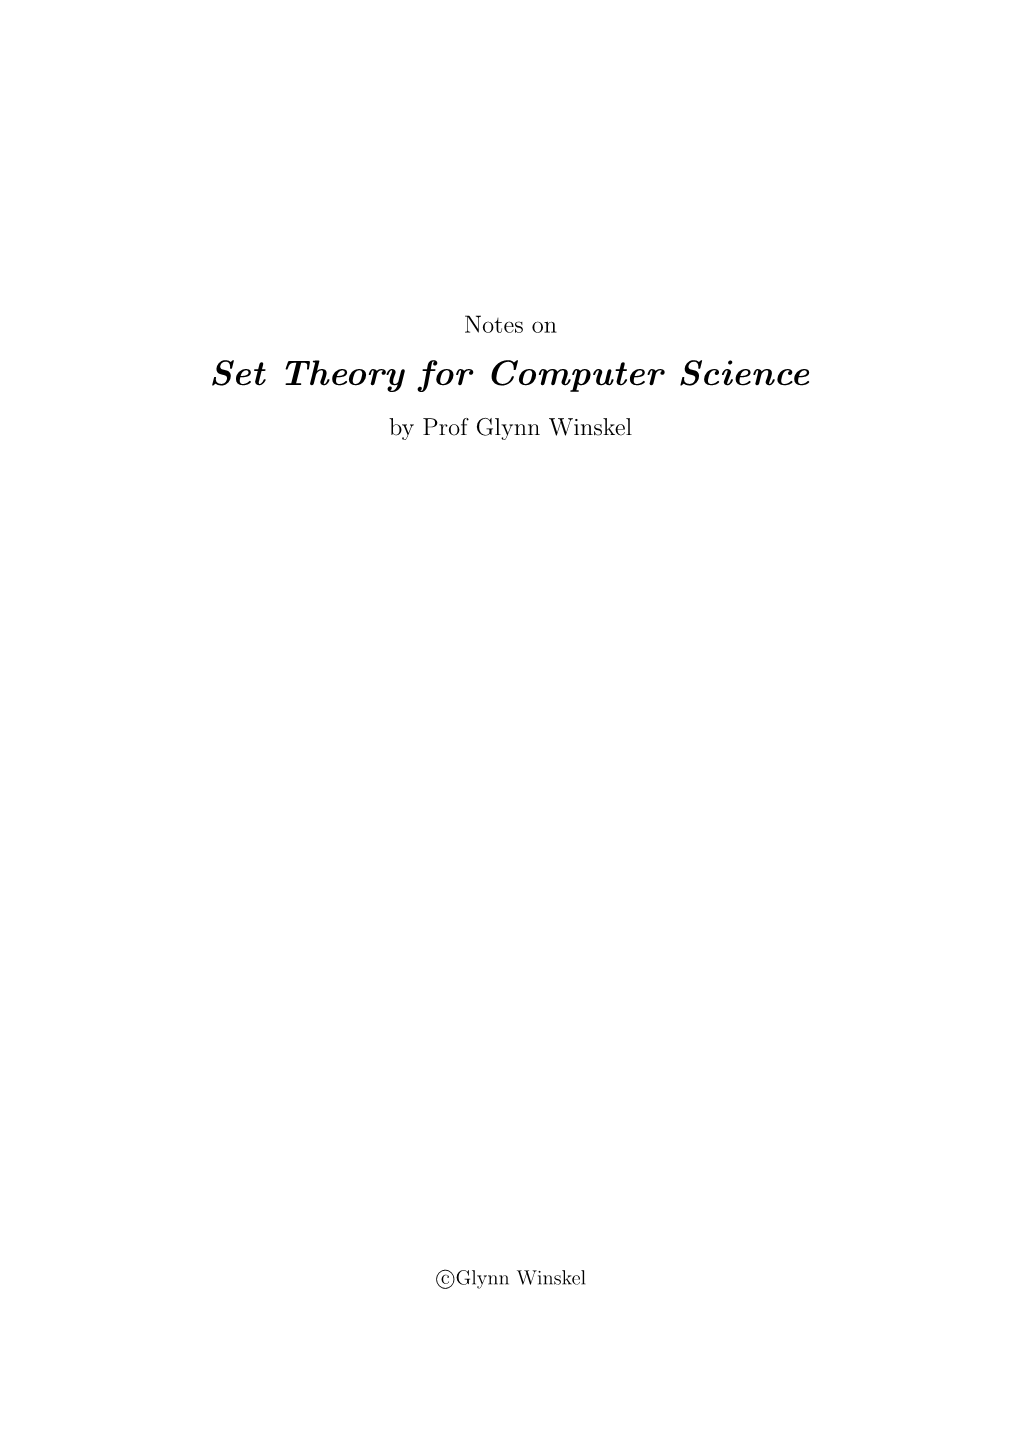 Set Theory for Computer Science by Prof Glynn Winskel